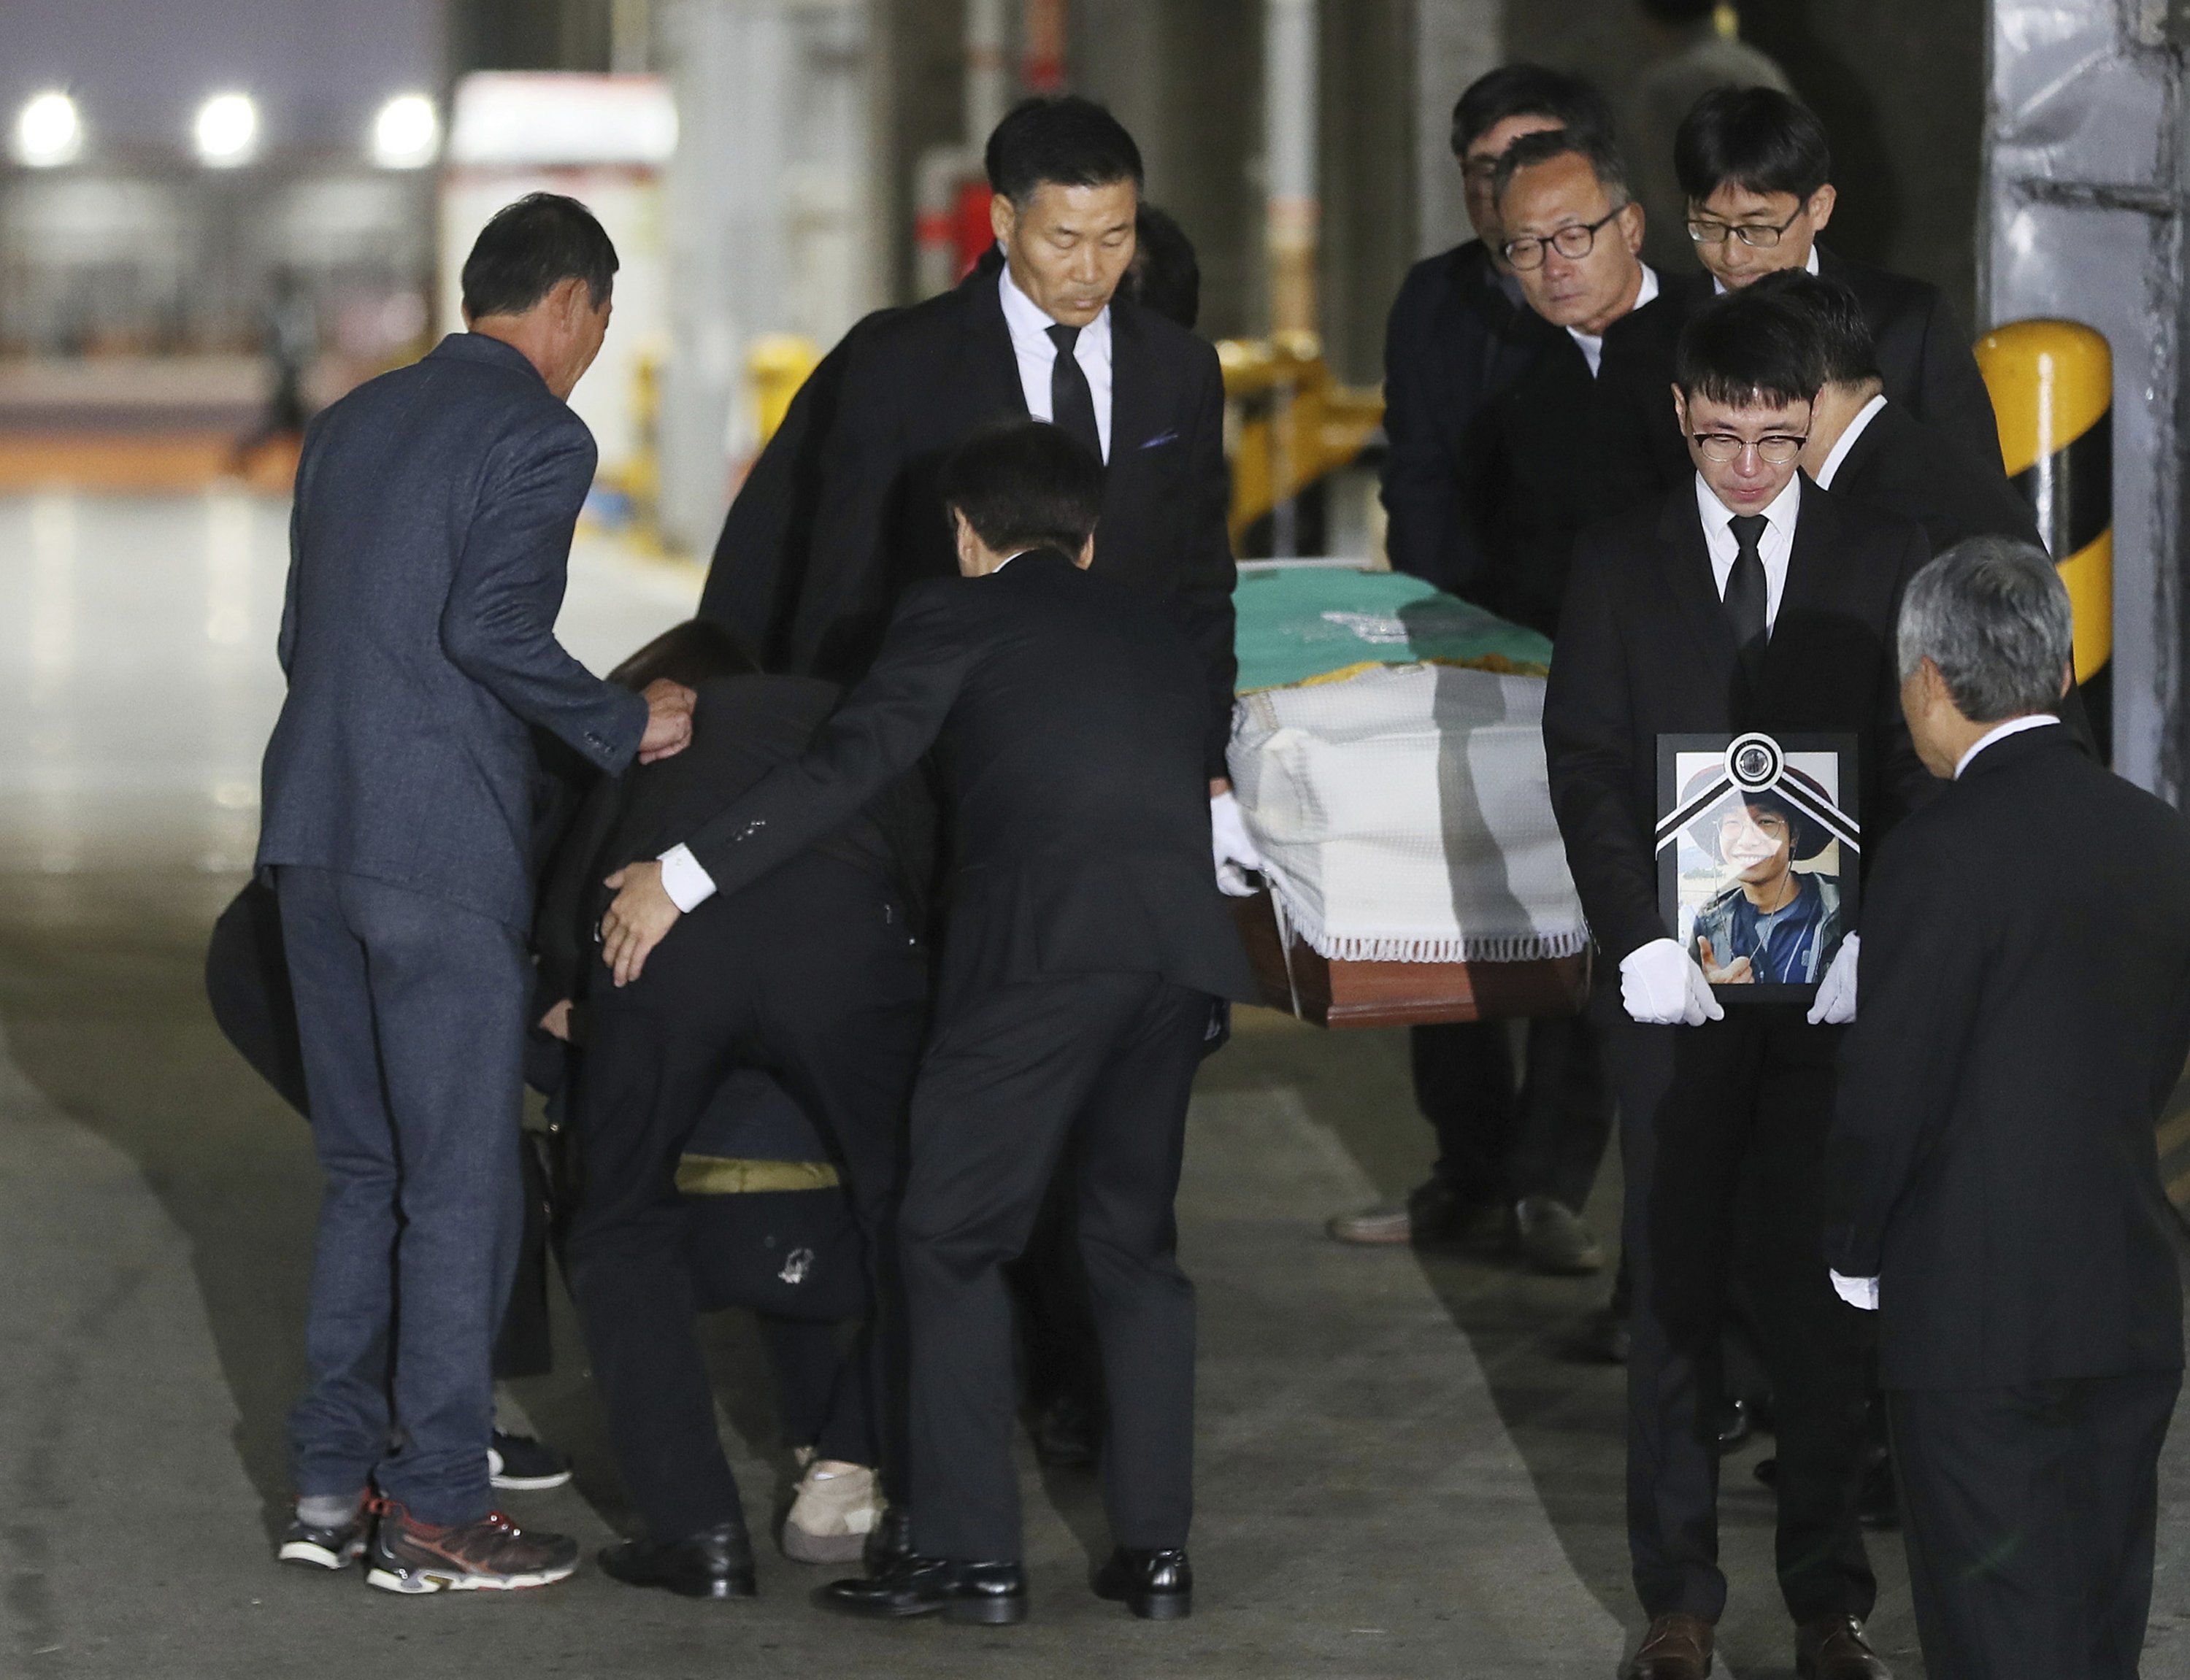 Weeping relatives receive bodies of South Korean climbers